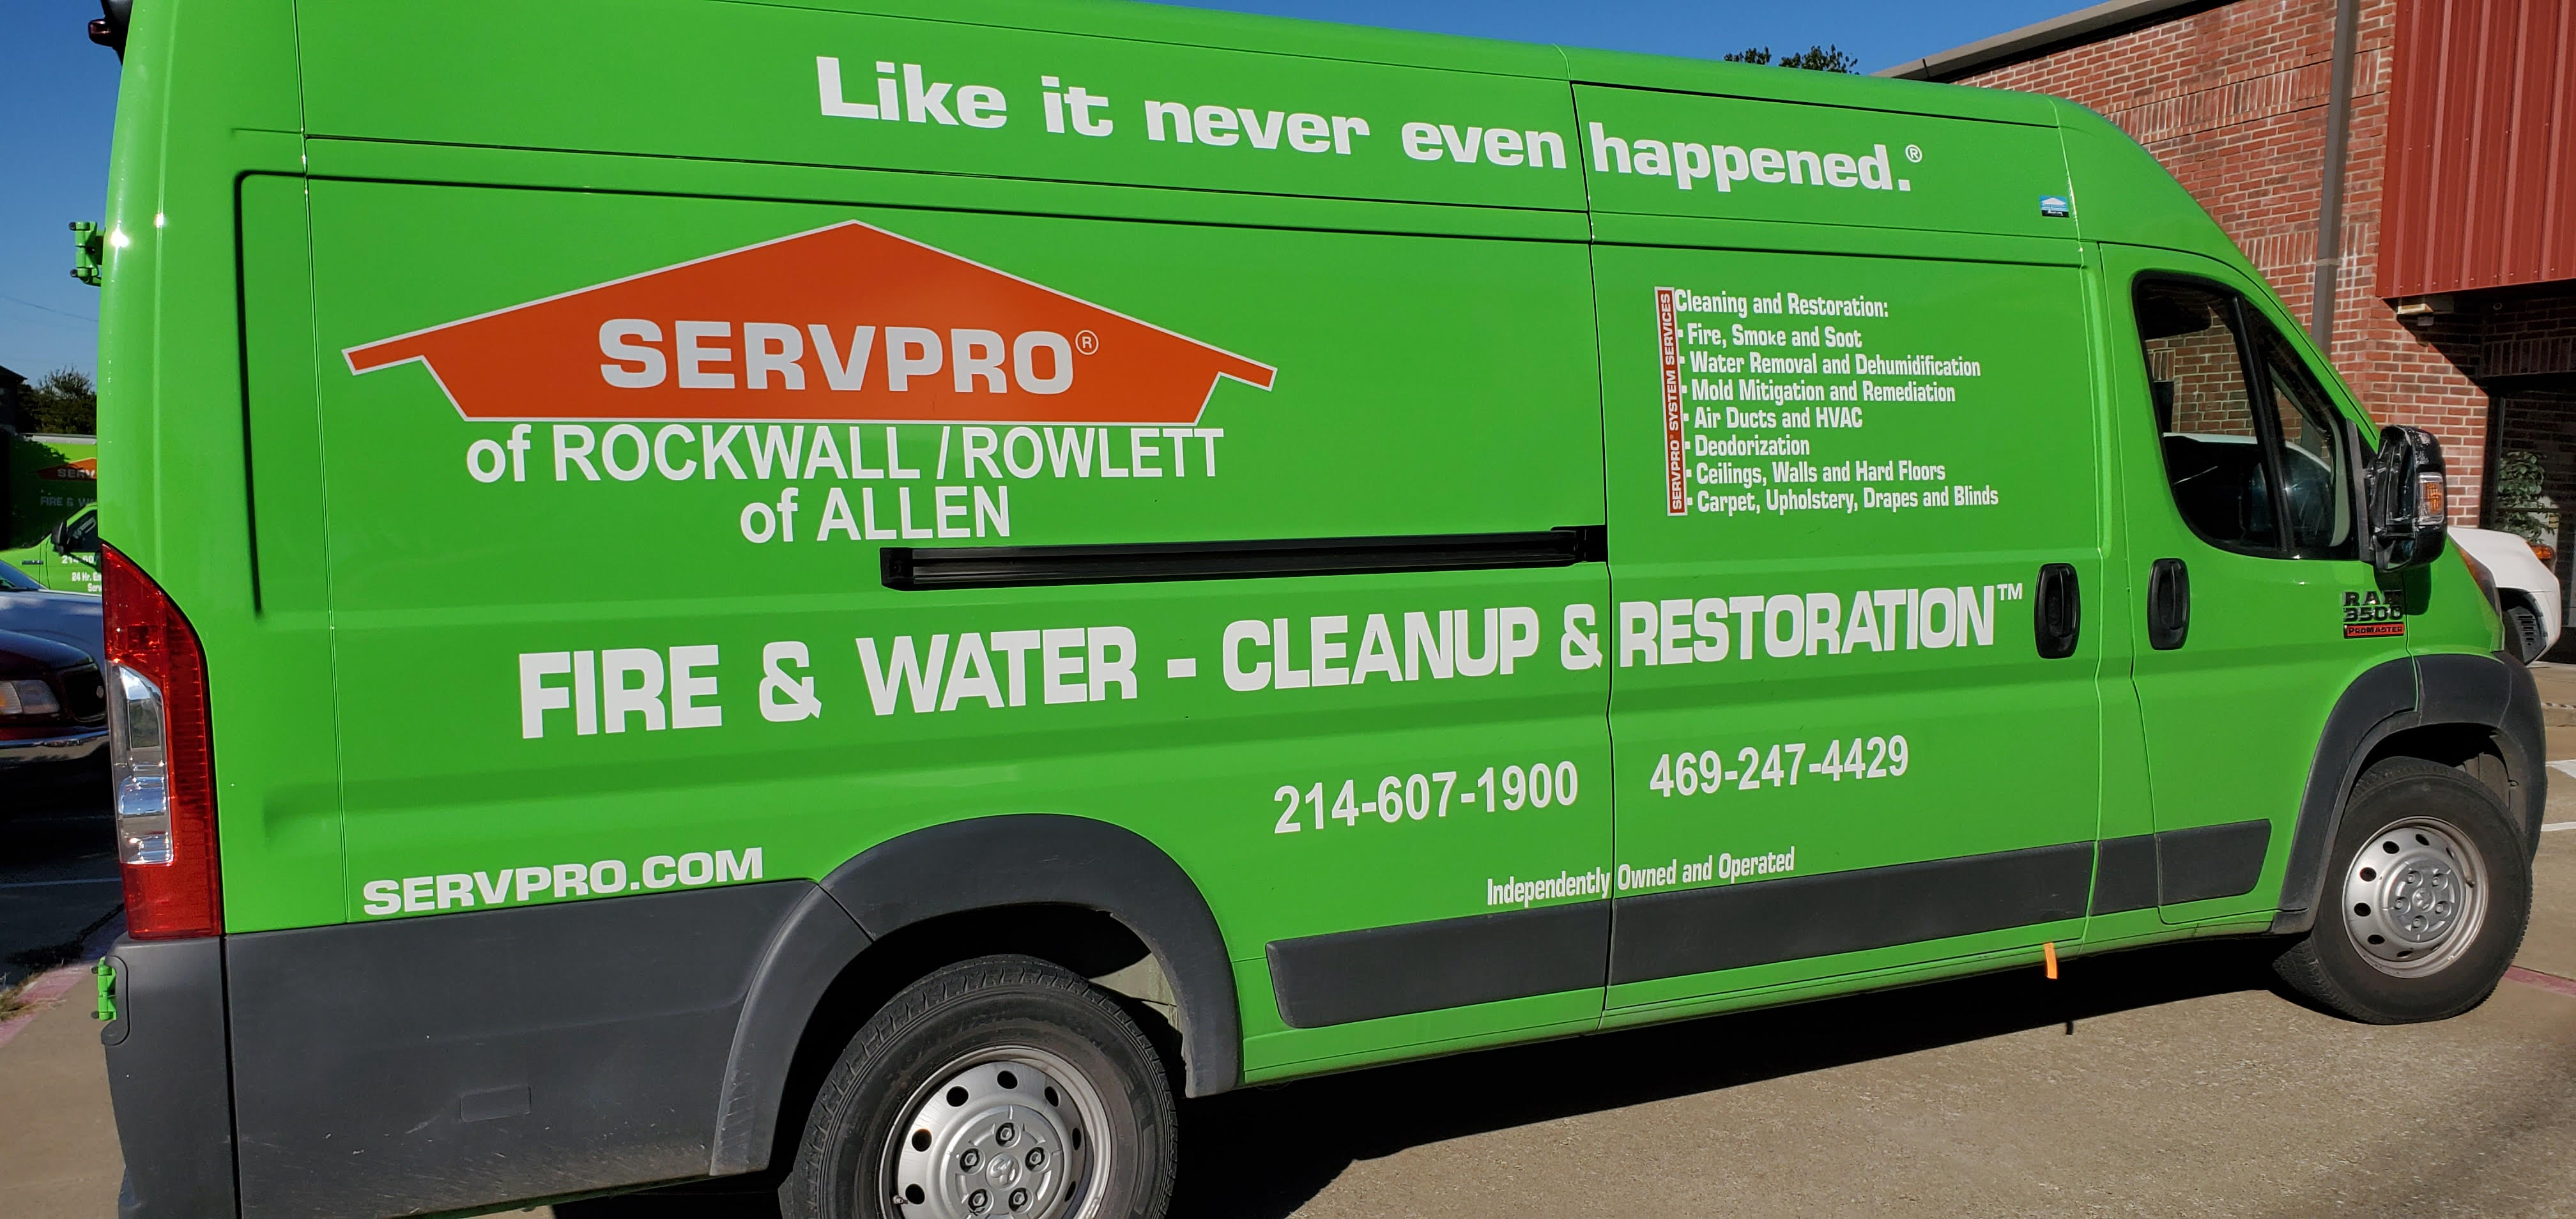 SERVPRO is ready to dispatch 24/7